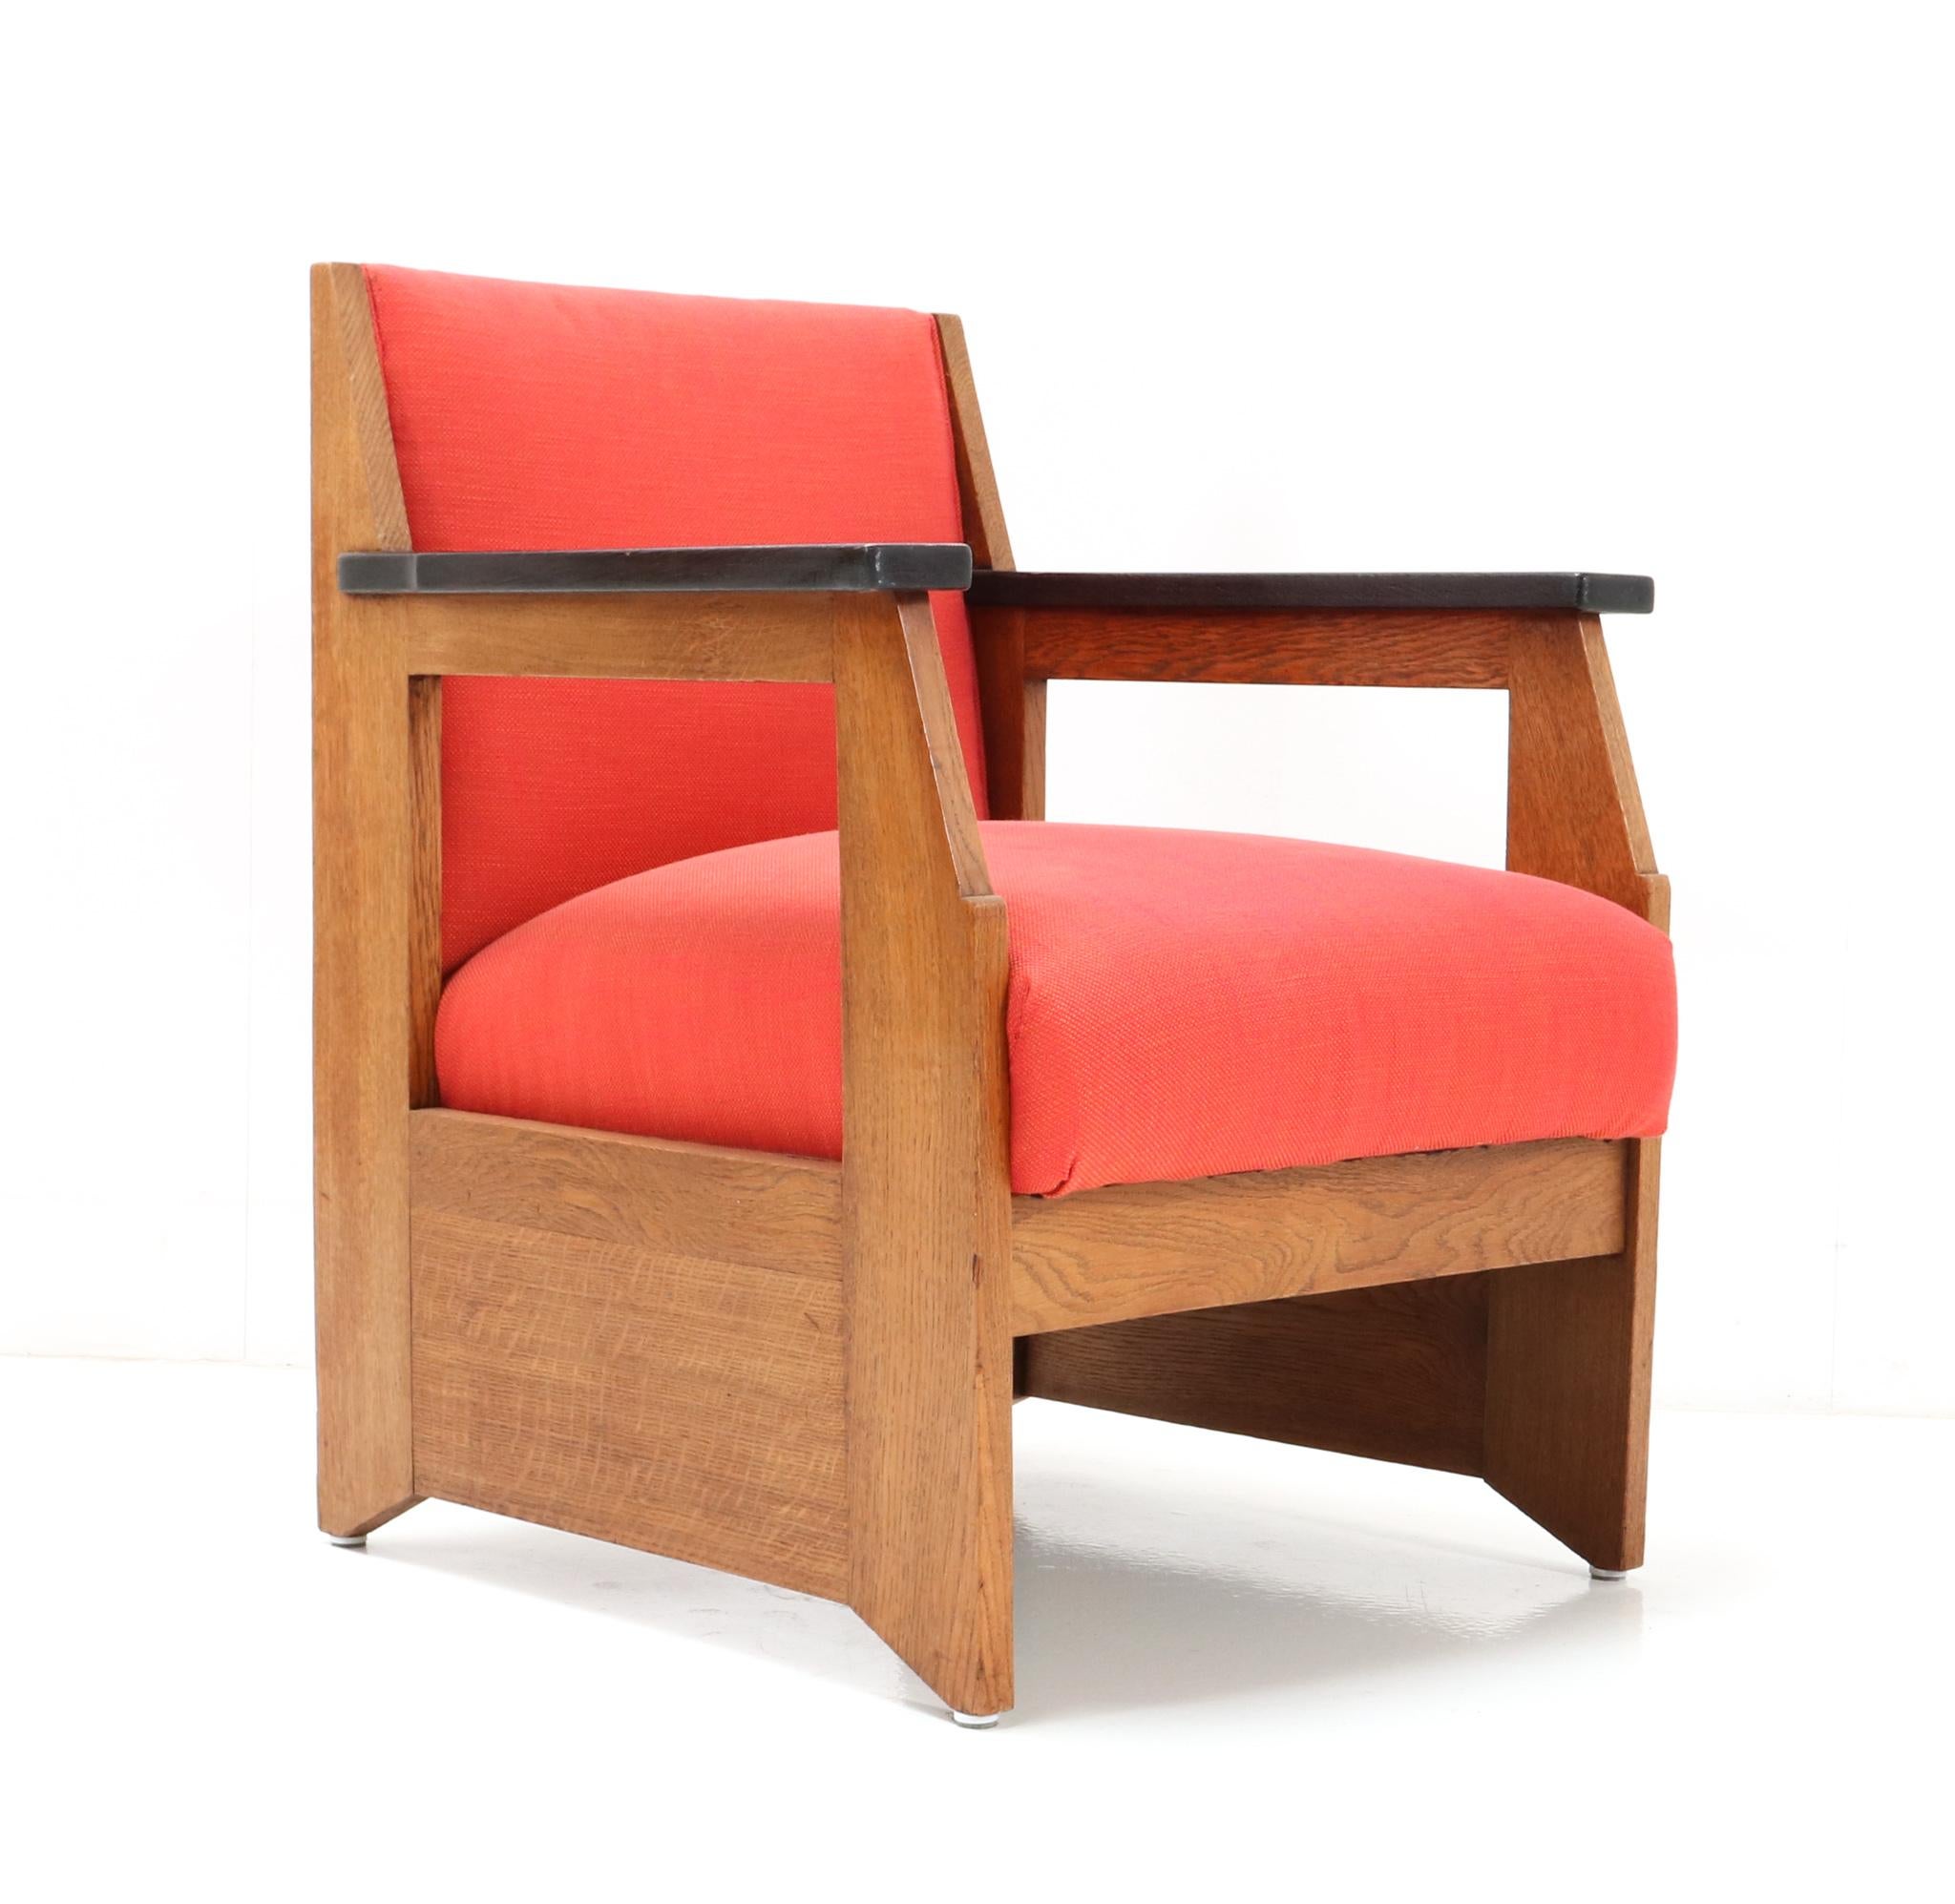 Pair of Oak Art Deco Modernist Easy Chairs by Hendrik Wouda for Pander, 1924 For Sale 3